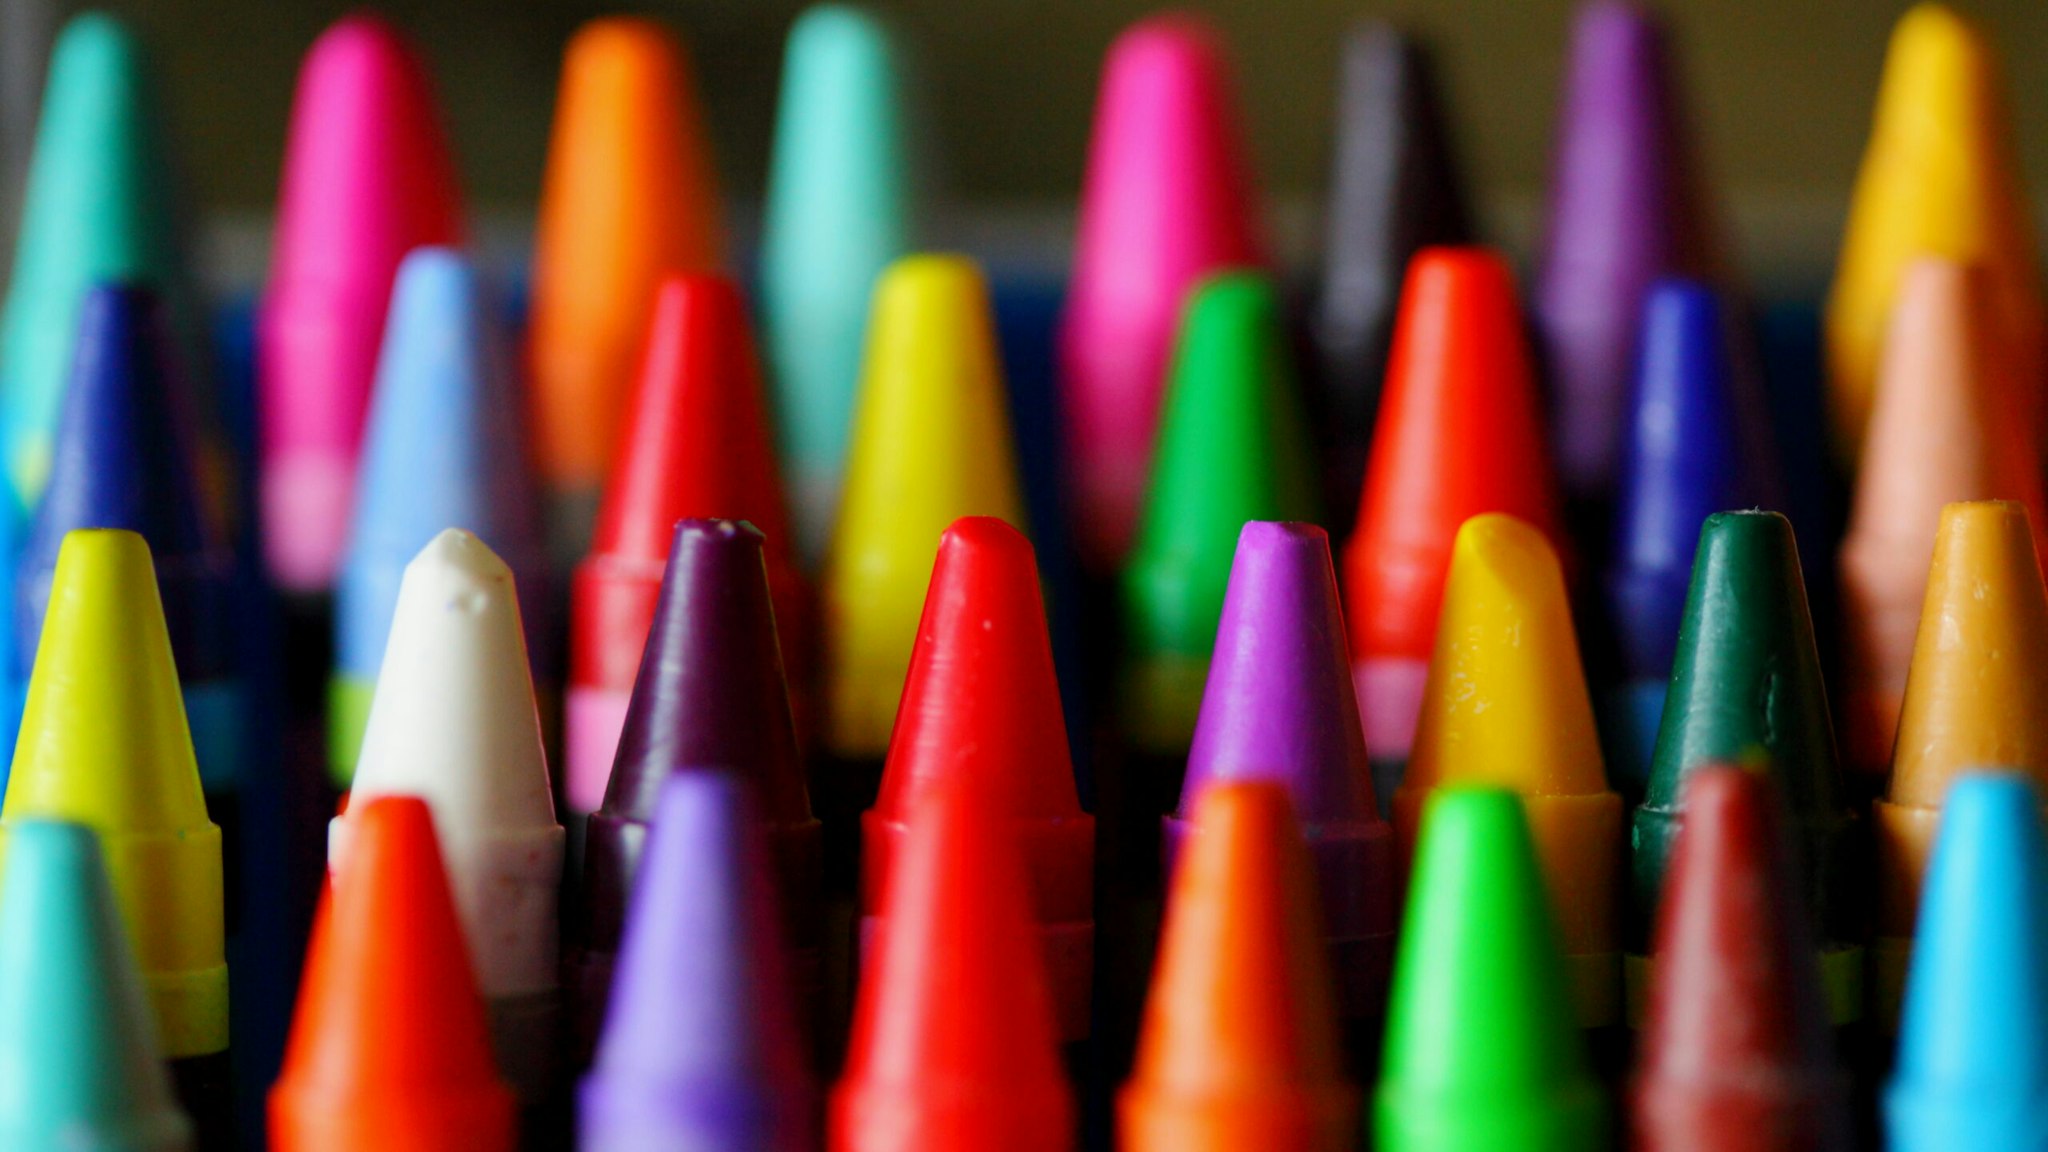 Crayola's Facebook post praising a transgender model as a cultural pioneer had some parents fuming